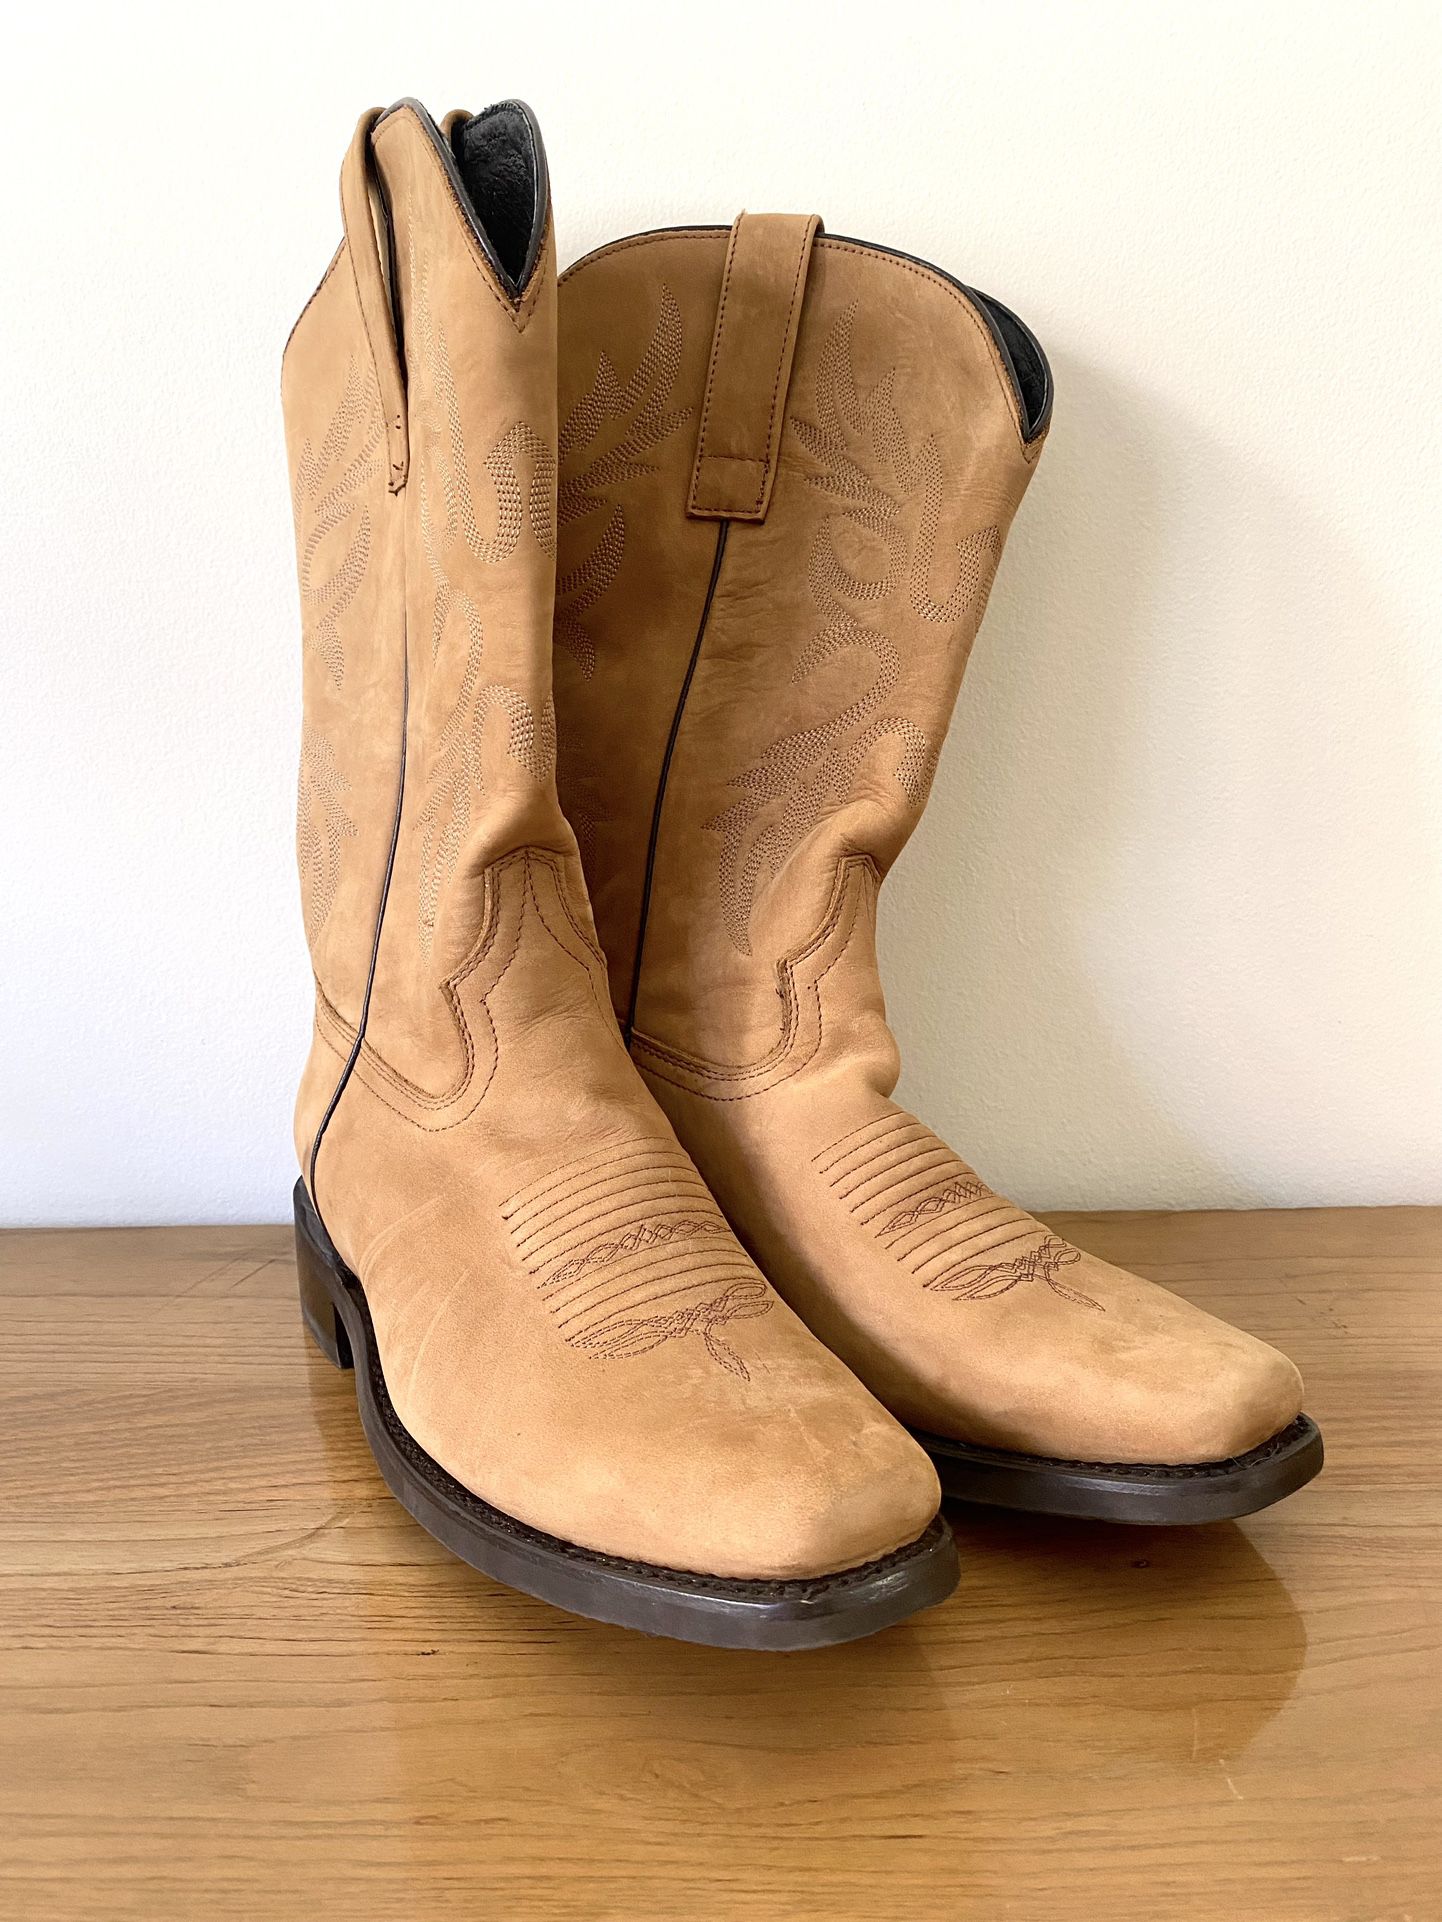 Masterson Women’s Square Toe Western Cowgirl Work Boots Size 7 1/2 M 